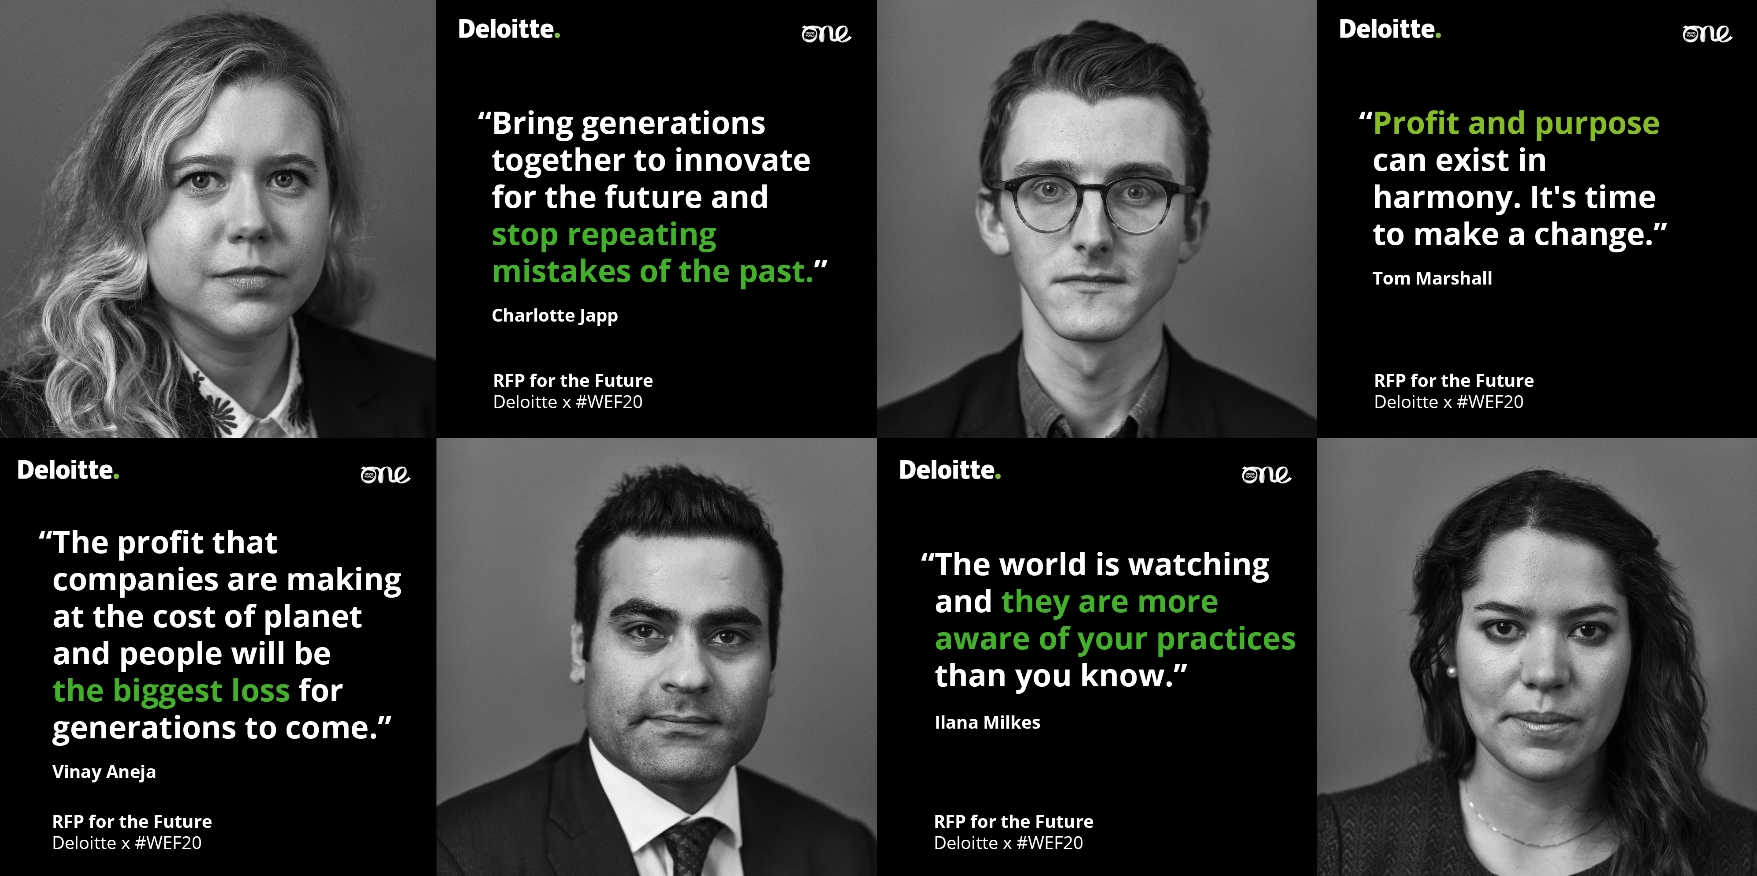 Deloitte delegates quotes and portraits at Davos